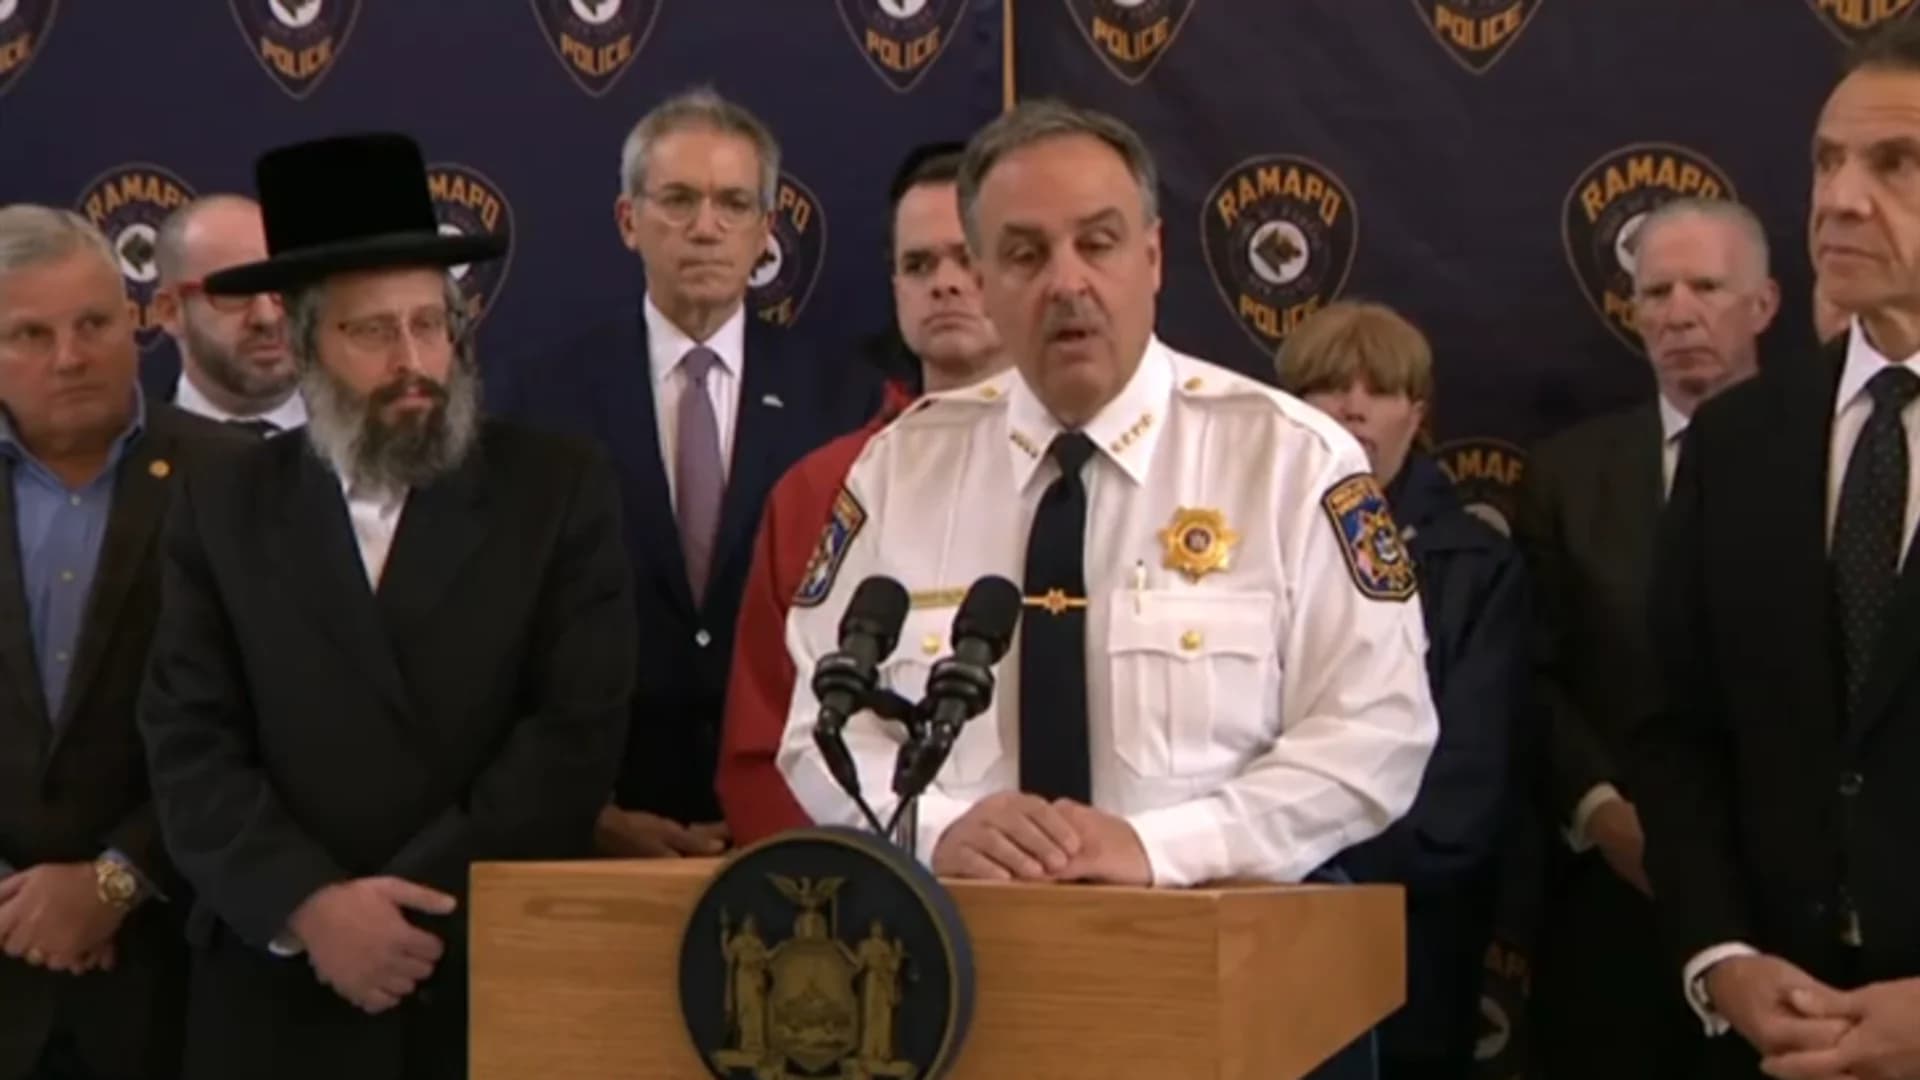 VIDEO: Authorities give update on Monsey stabbing